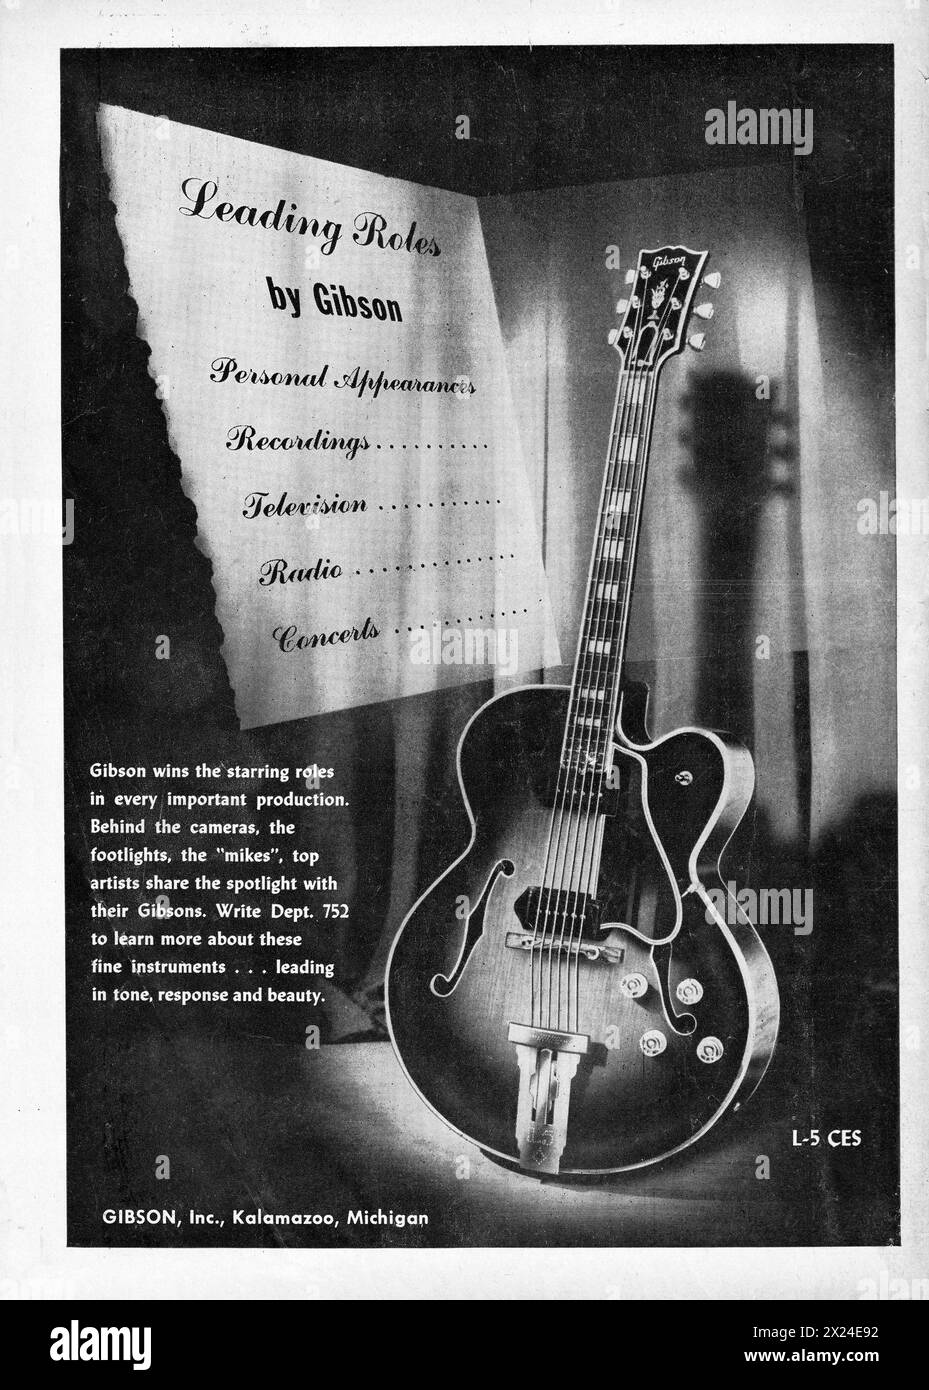 An ad for Gibson guitars from an early 1950s magazine. It showcases the L-5 CES model. Stock Photo